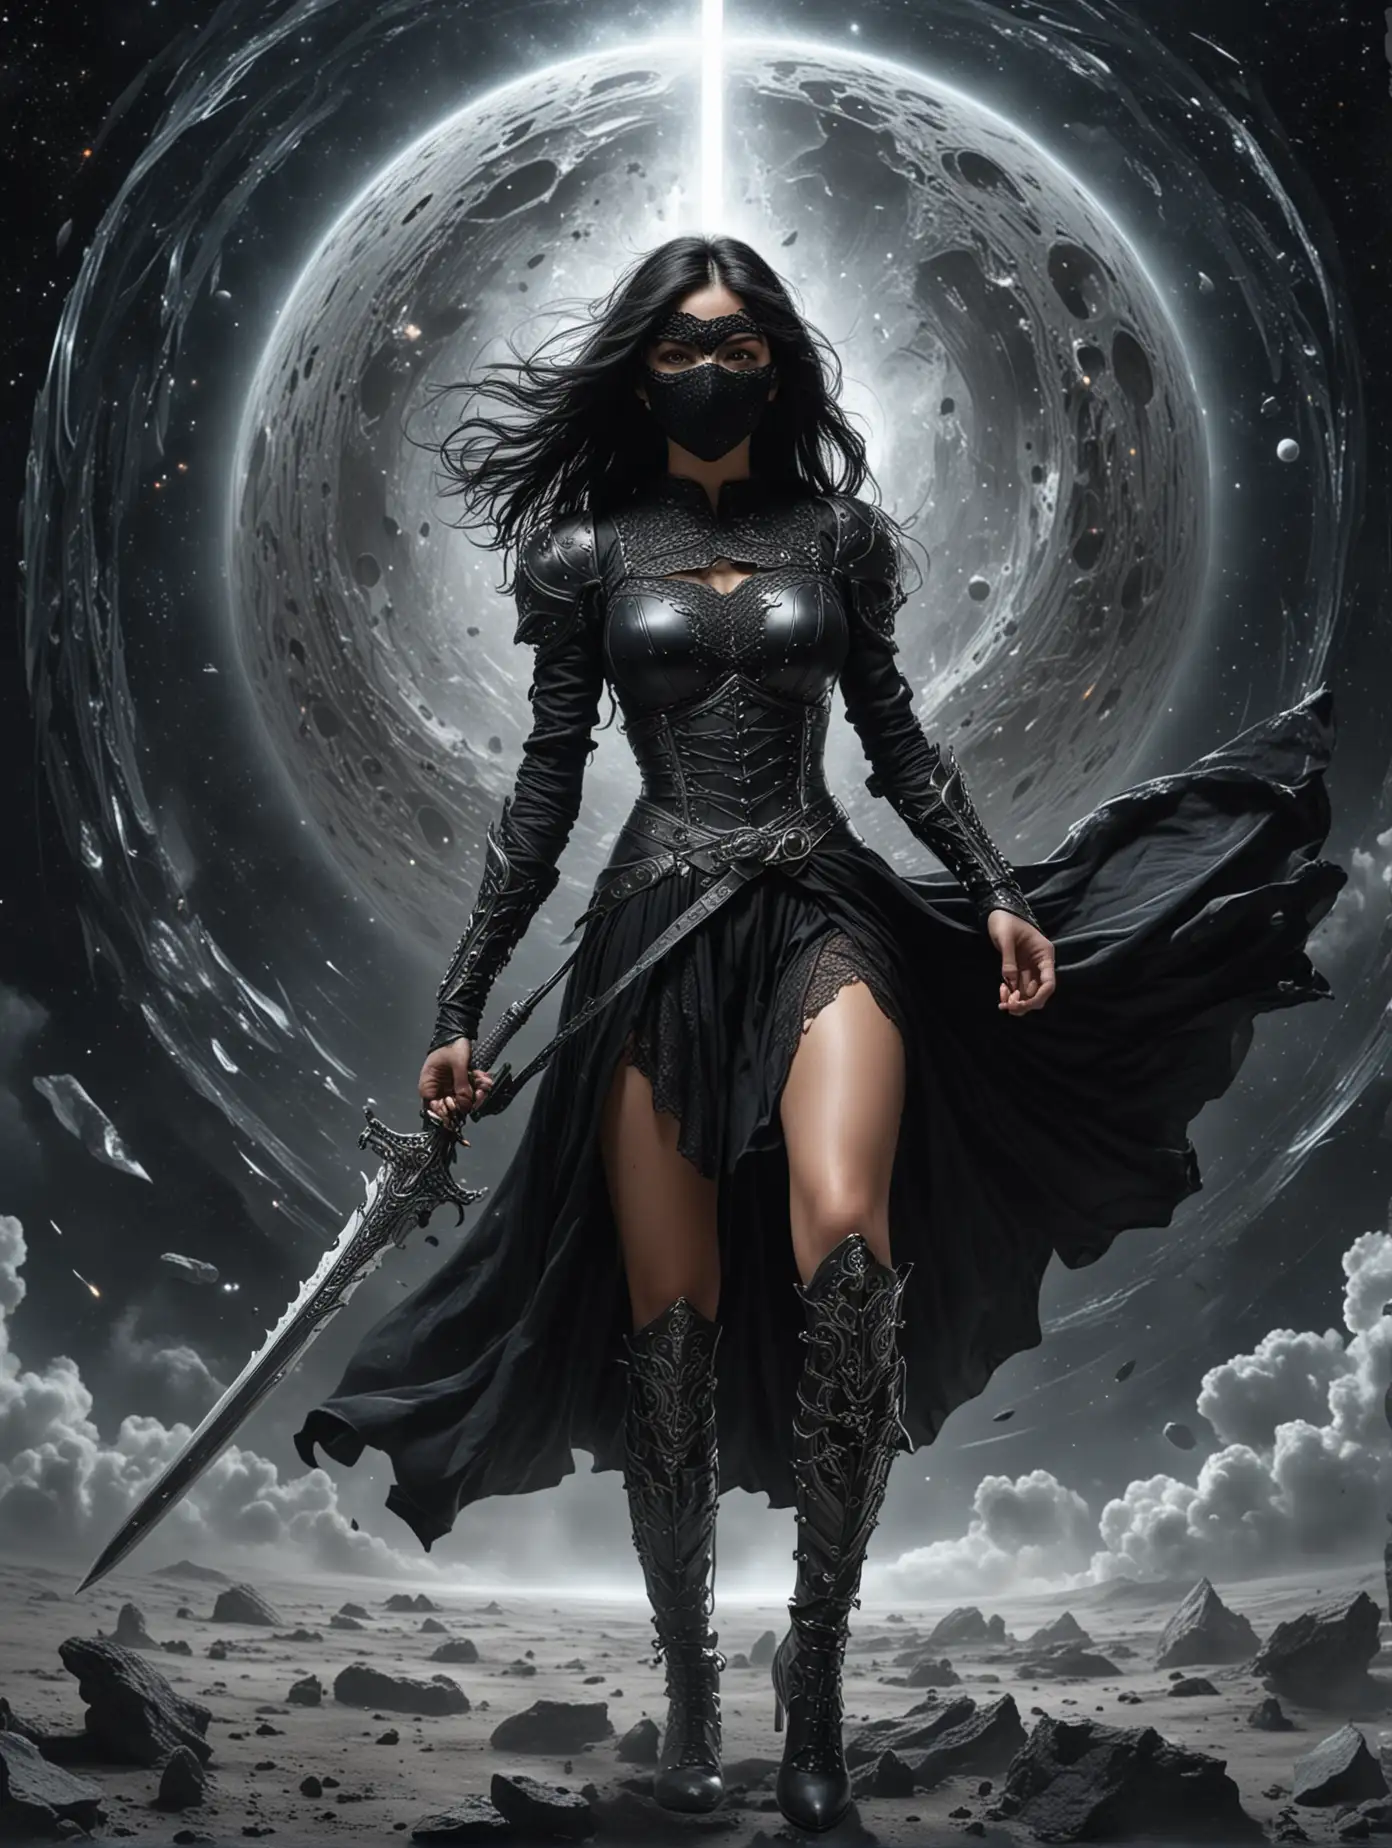 Elegant-Warrior-Woman-with-Silver-Armor-in-Celestial-Confrontation